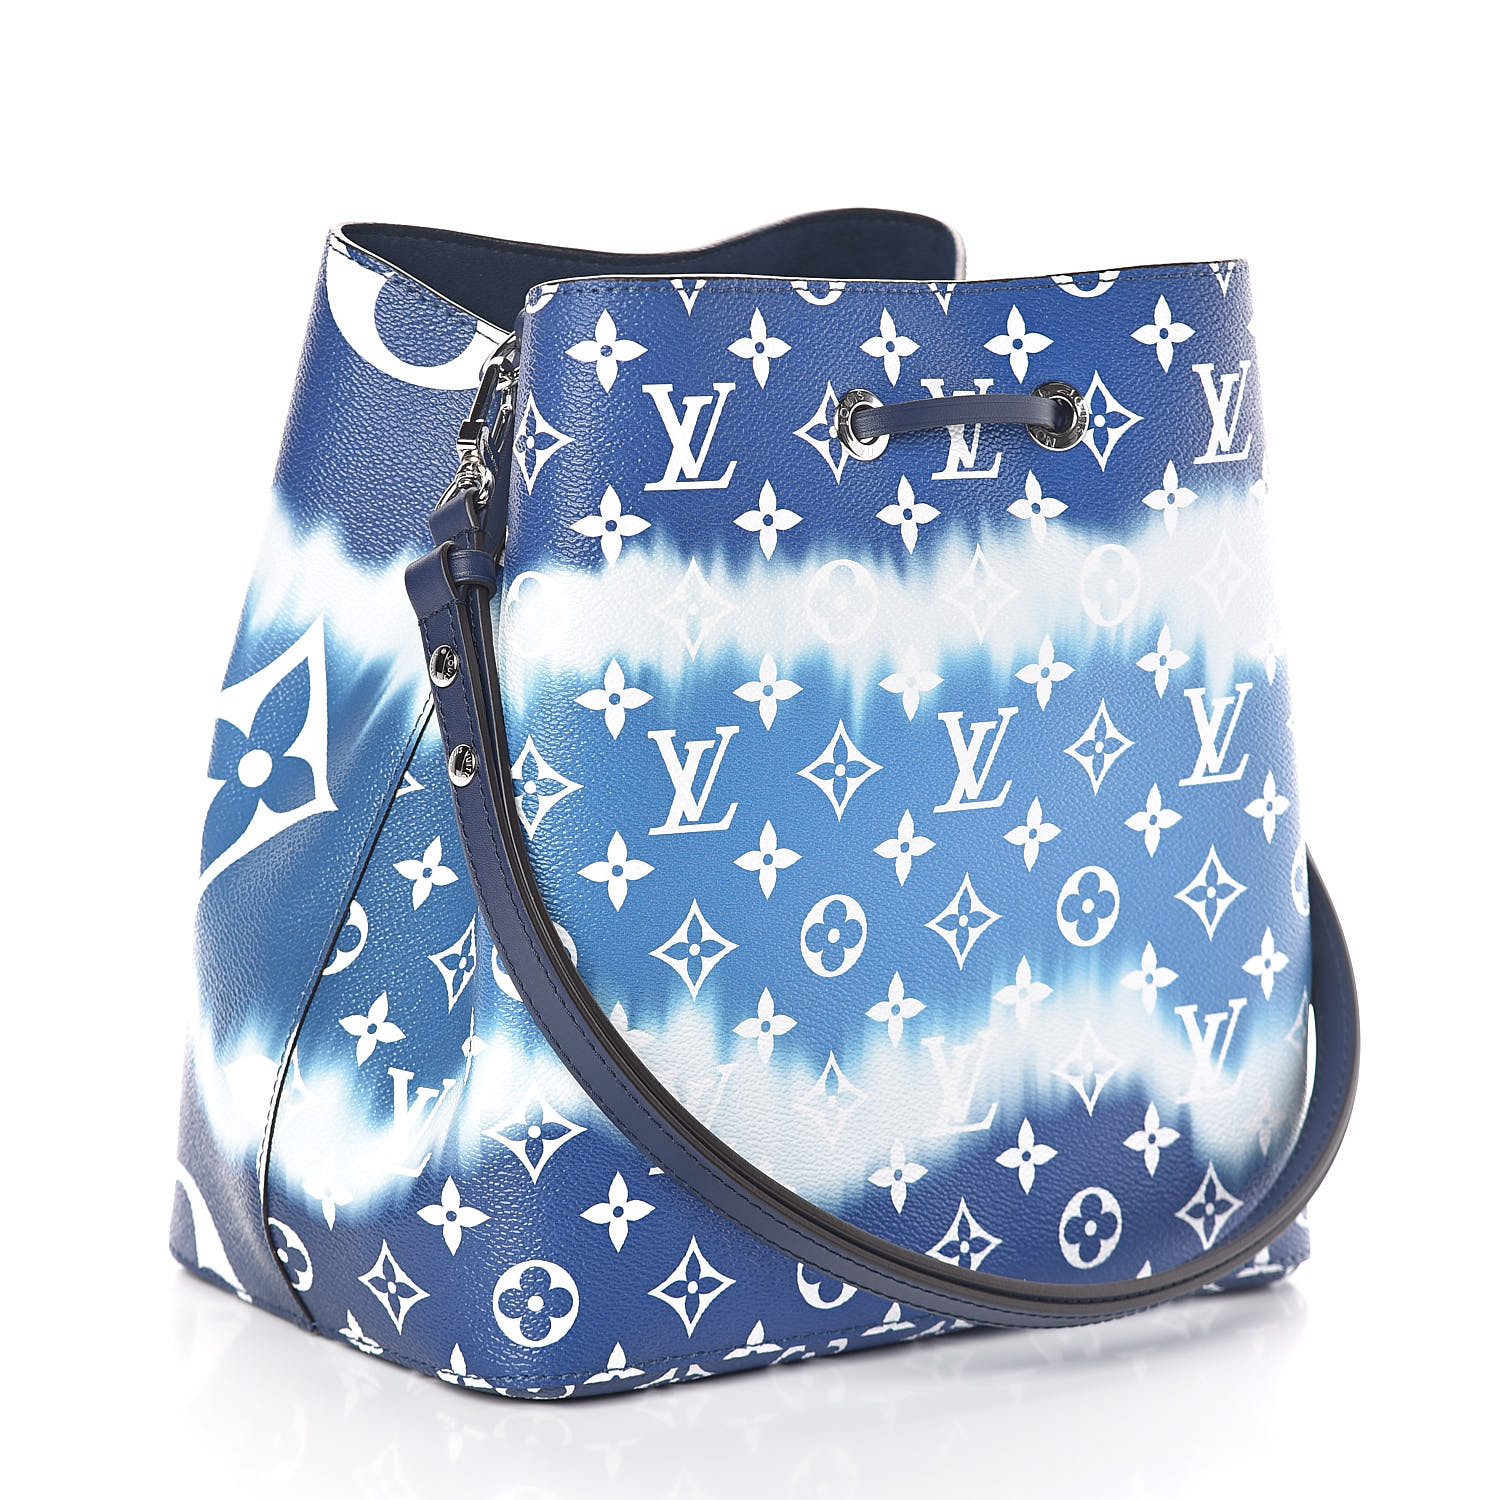 Products by Louis Vuitton: LV Escale Monogram Shawl